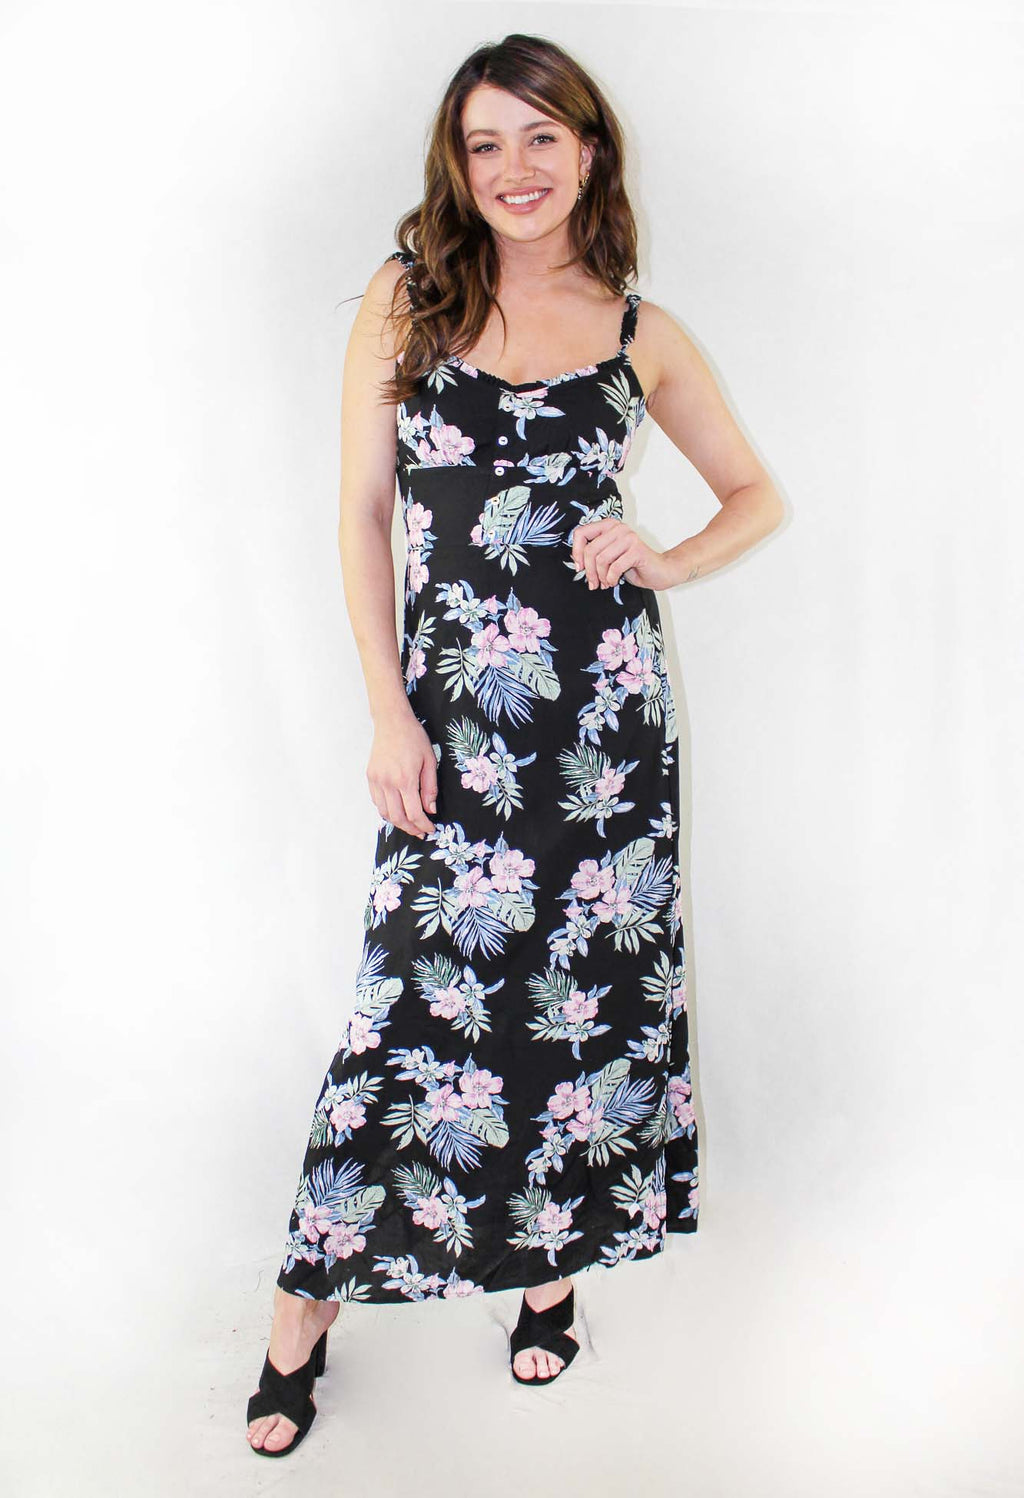 Women's Sleeveless Strappy Floral Maxi Dress